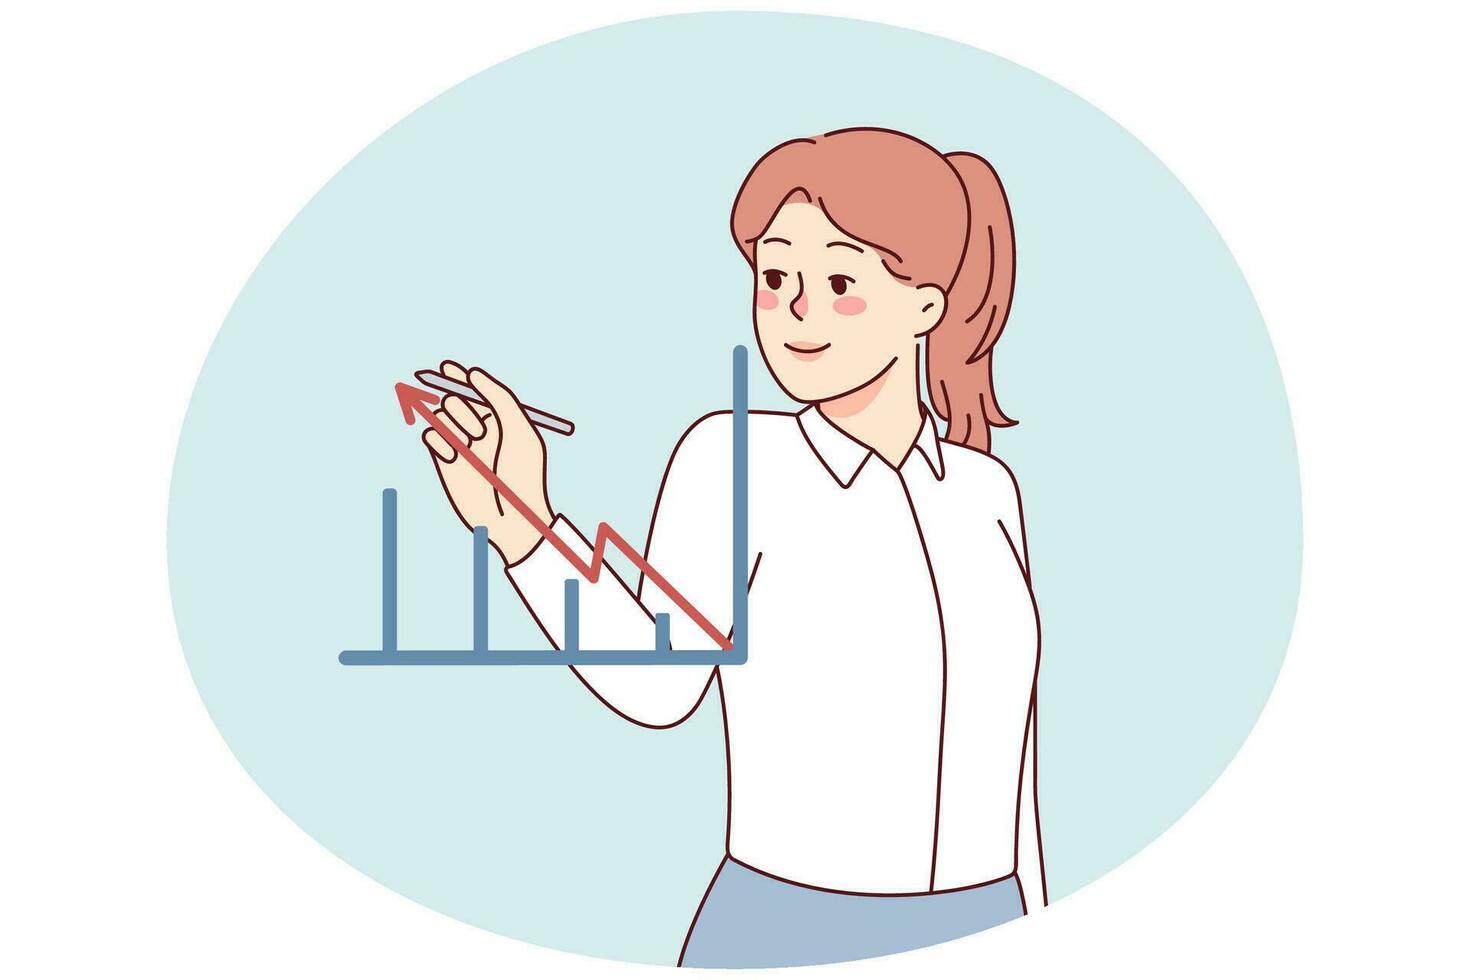 Businesswoman drawing graph with arrow going up. Smiling female employee with chart showing rise in commerce and finance. Business success. Vector illustration.